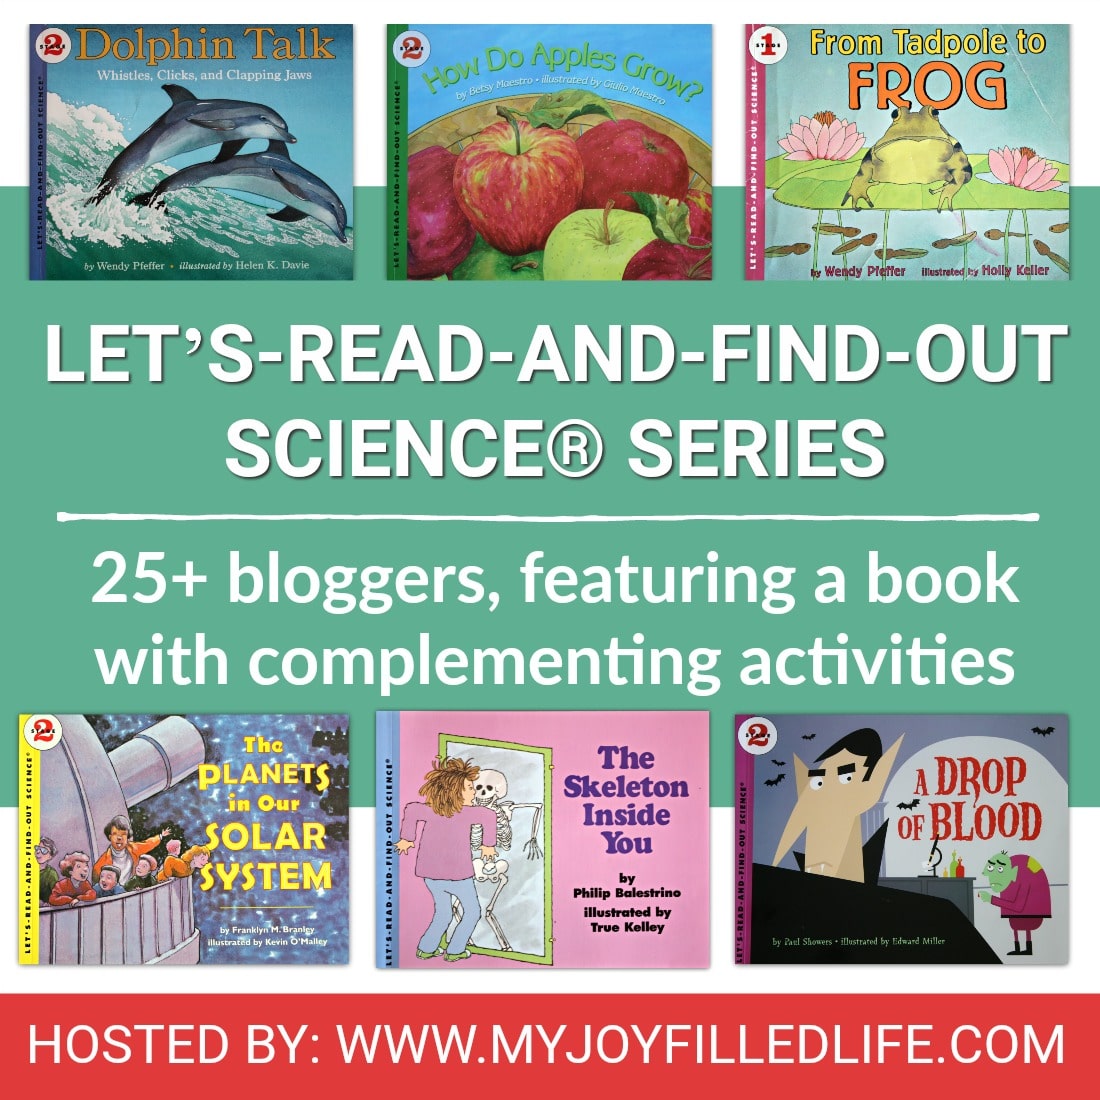 LET'S-READ-AND-FIND-OUT SCIENCE® BOOK SERIES ACTIVITIES - My Joy 